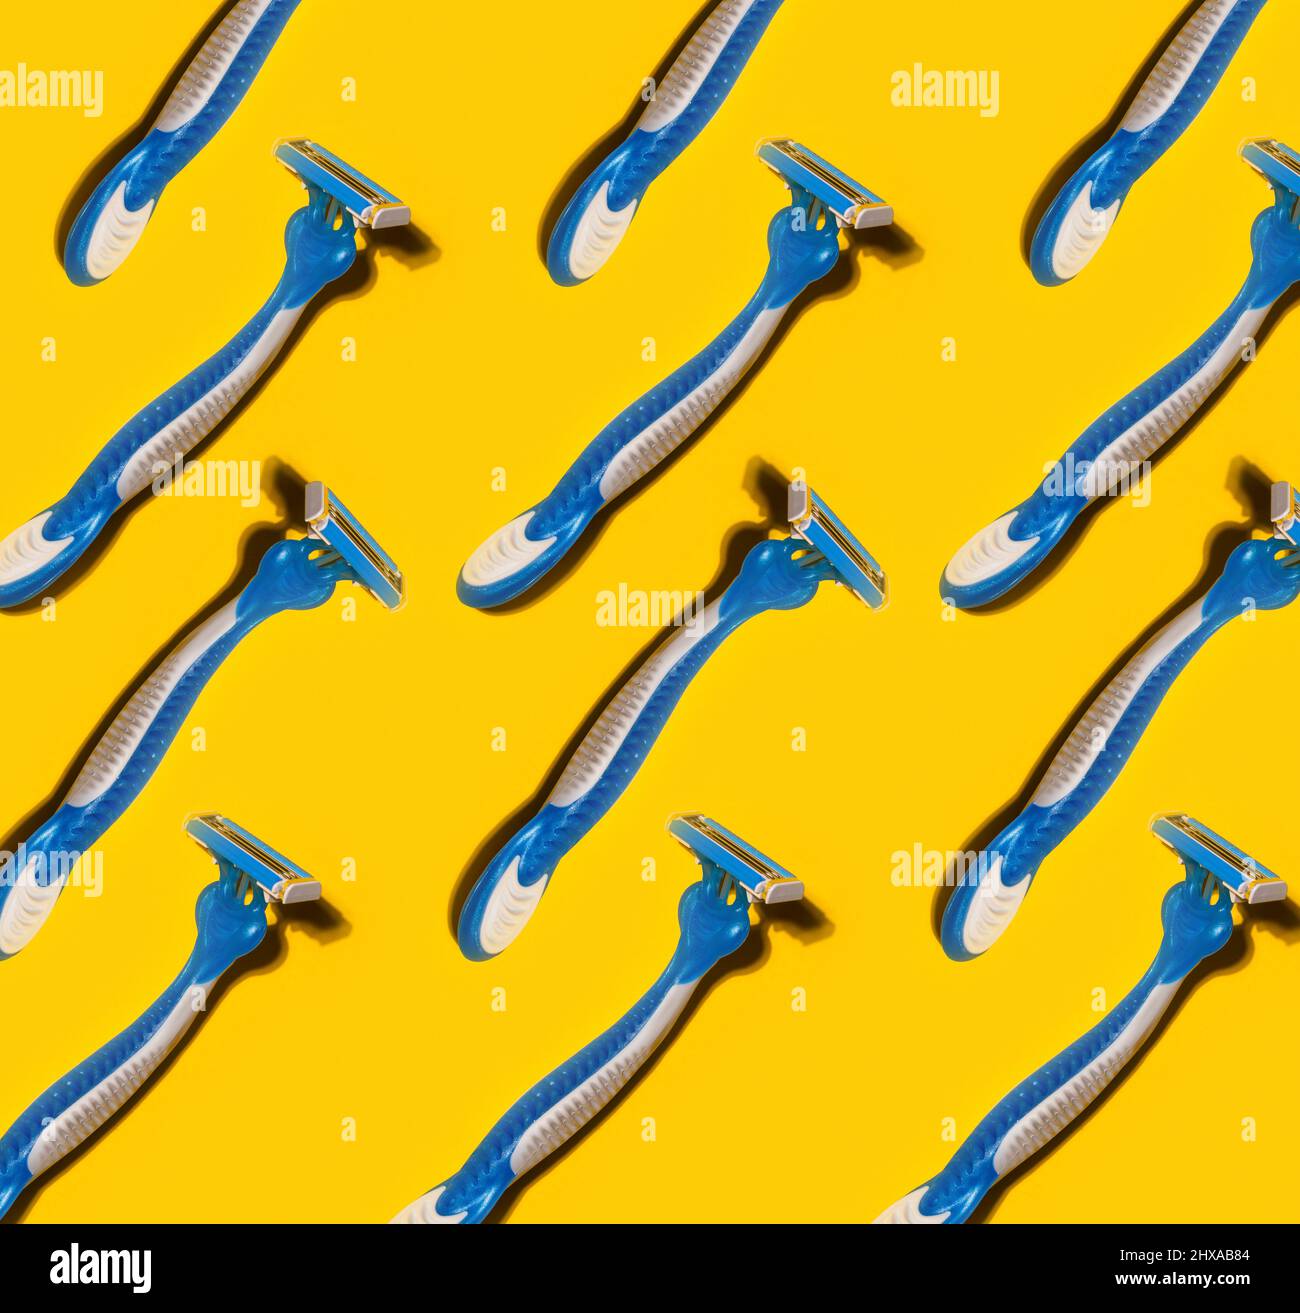 pattern with disposable shaving razors on yellow background Stock Photo